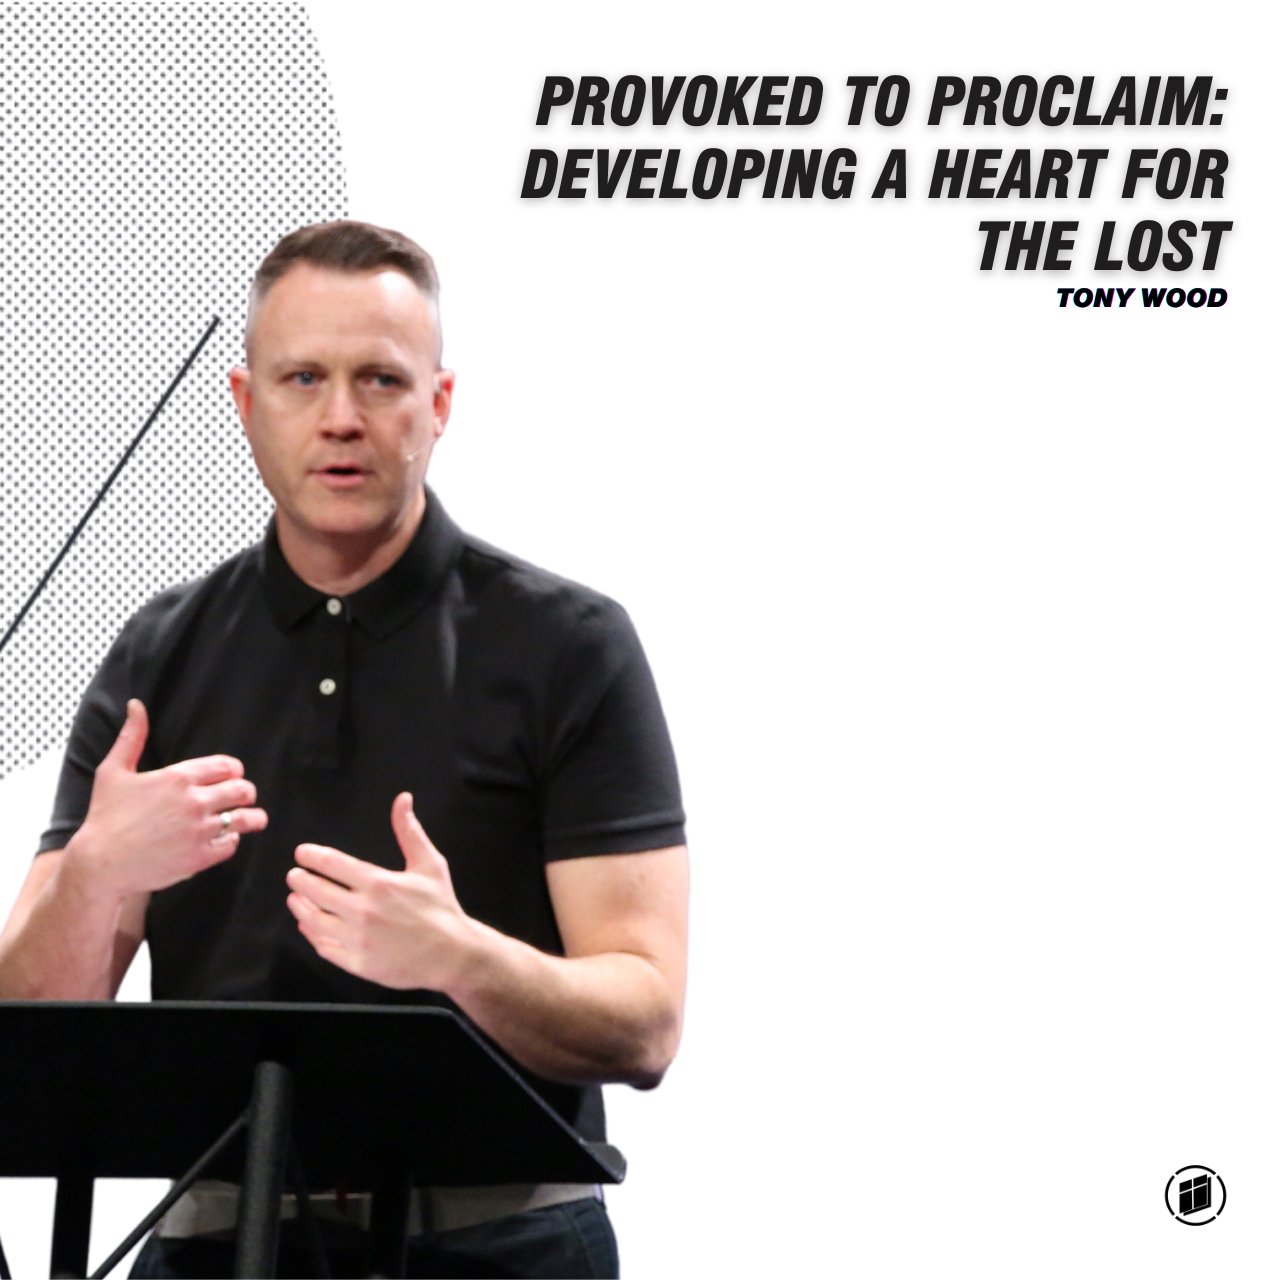 Provoked to Proclaim: Developing a Heart for the Lost